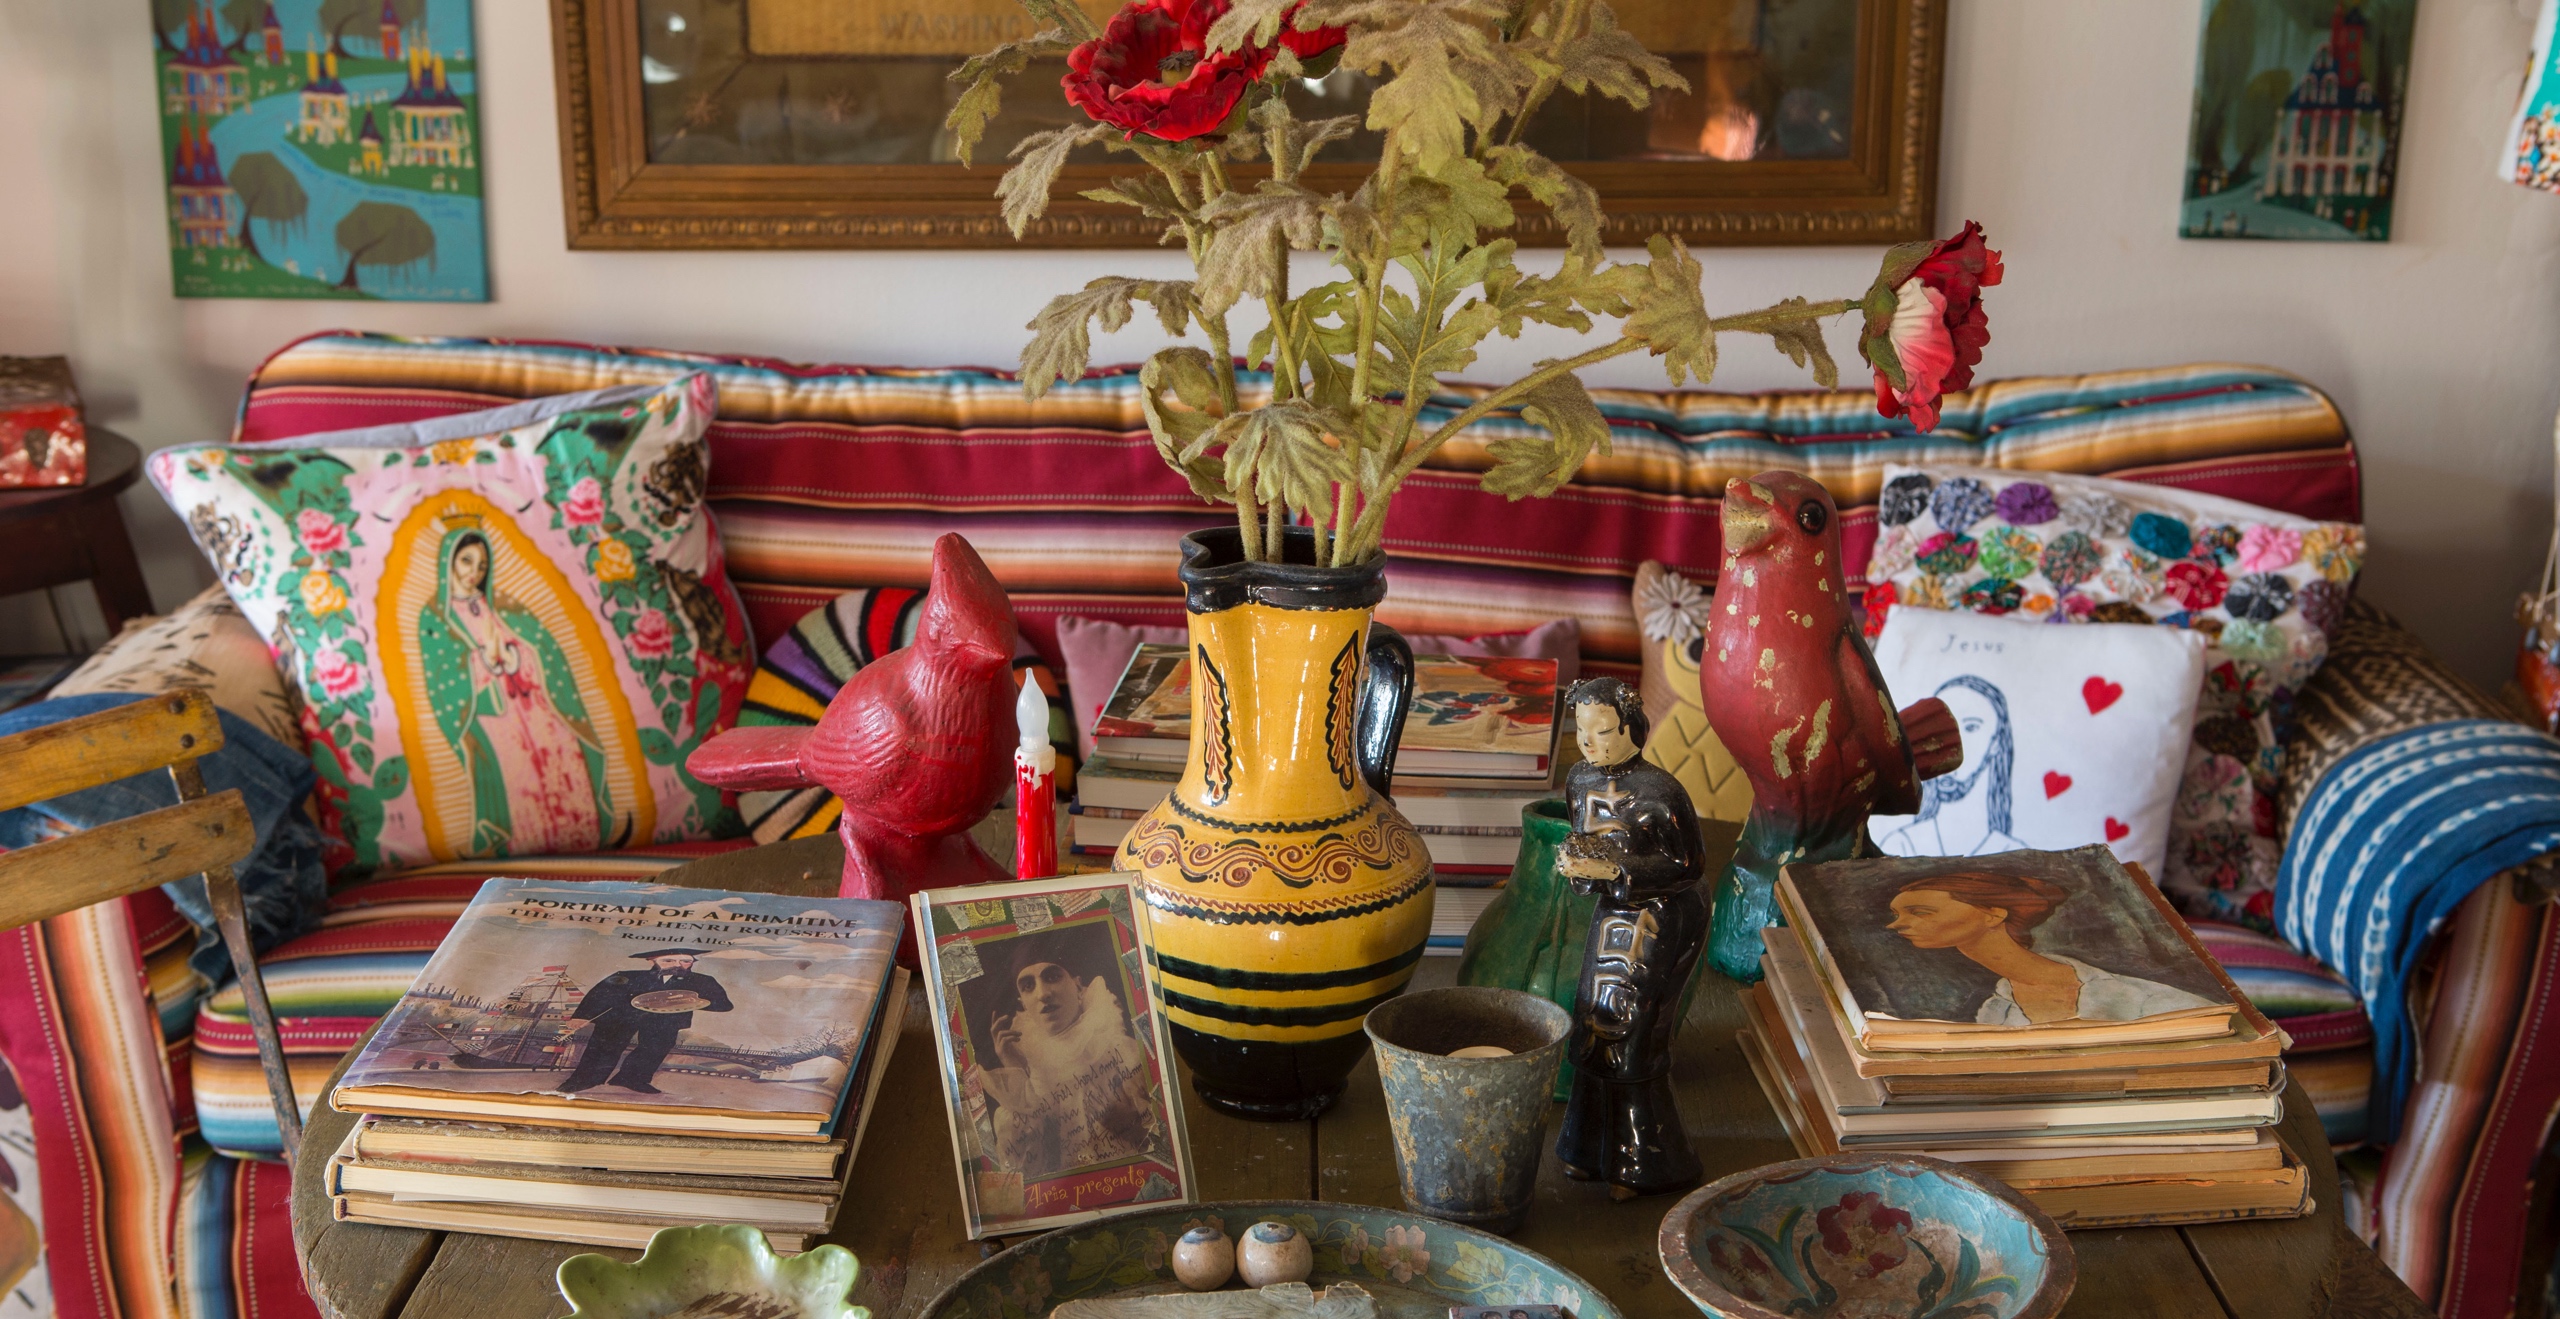 In the author’s New York City apartment, an eclectic tabletop exhibit of beloved flea market finds, souvenirs of travel, and gifts from friends